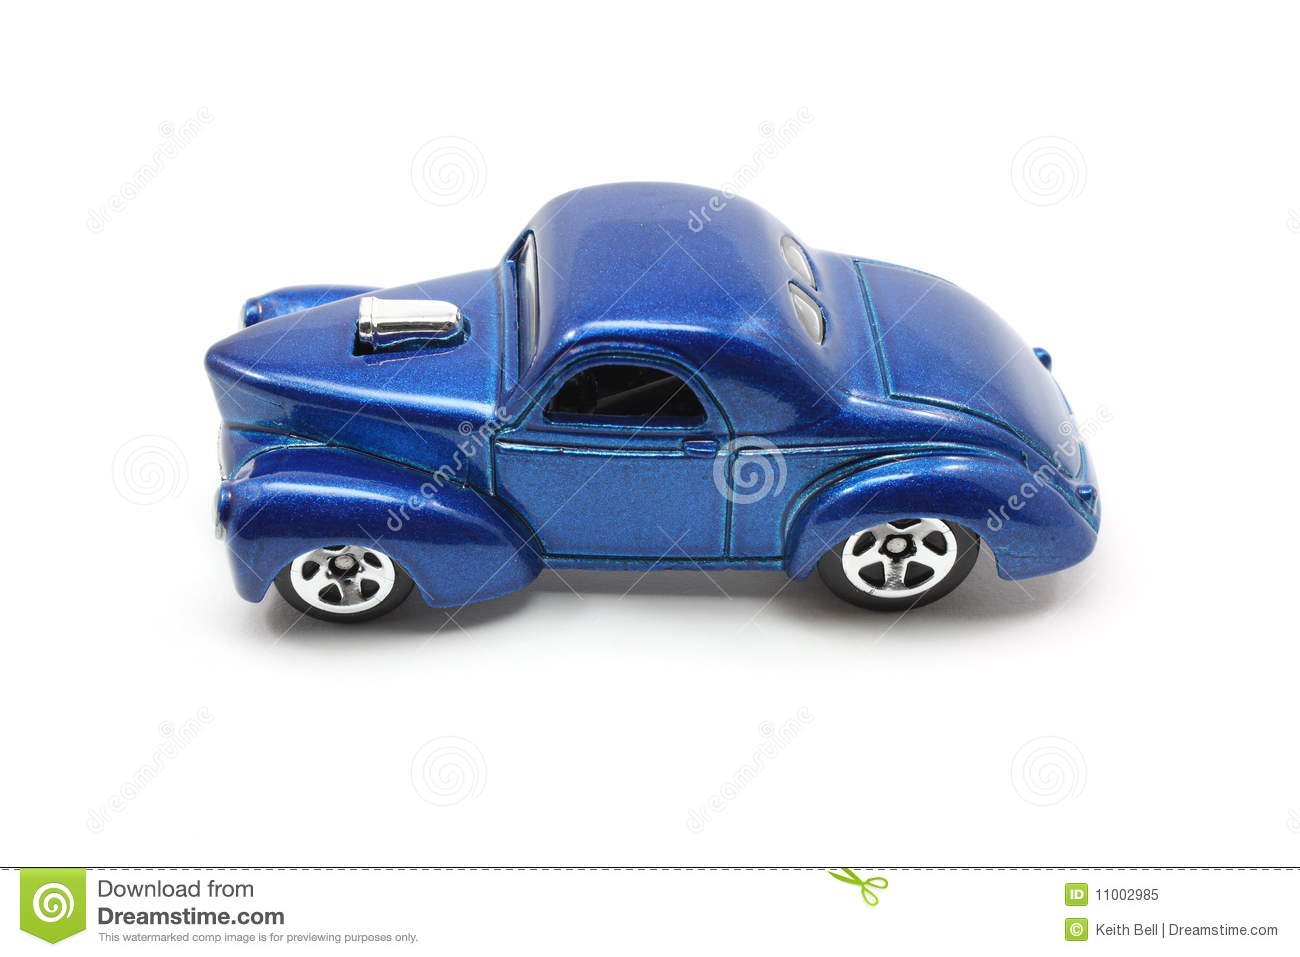 Toy Blue Drag Racing Car Royalty Free Stock Photo   Image  11002985